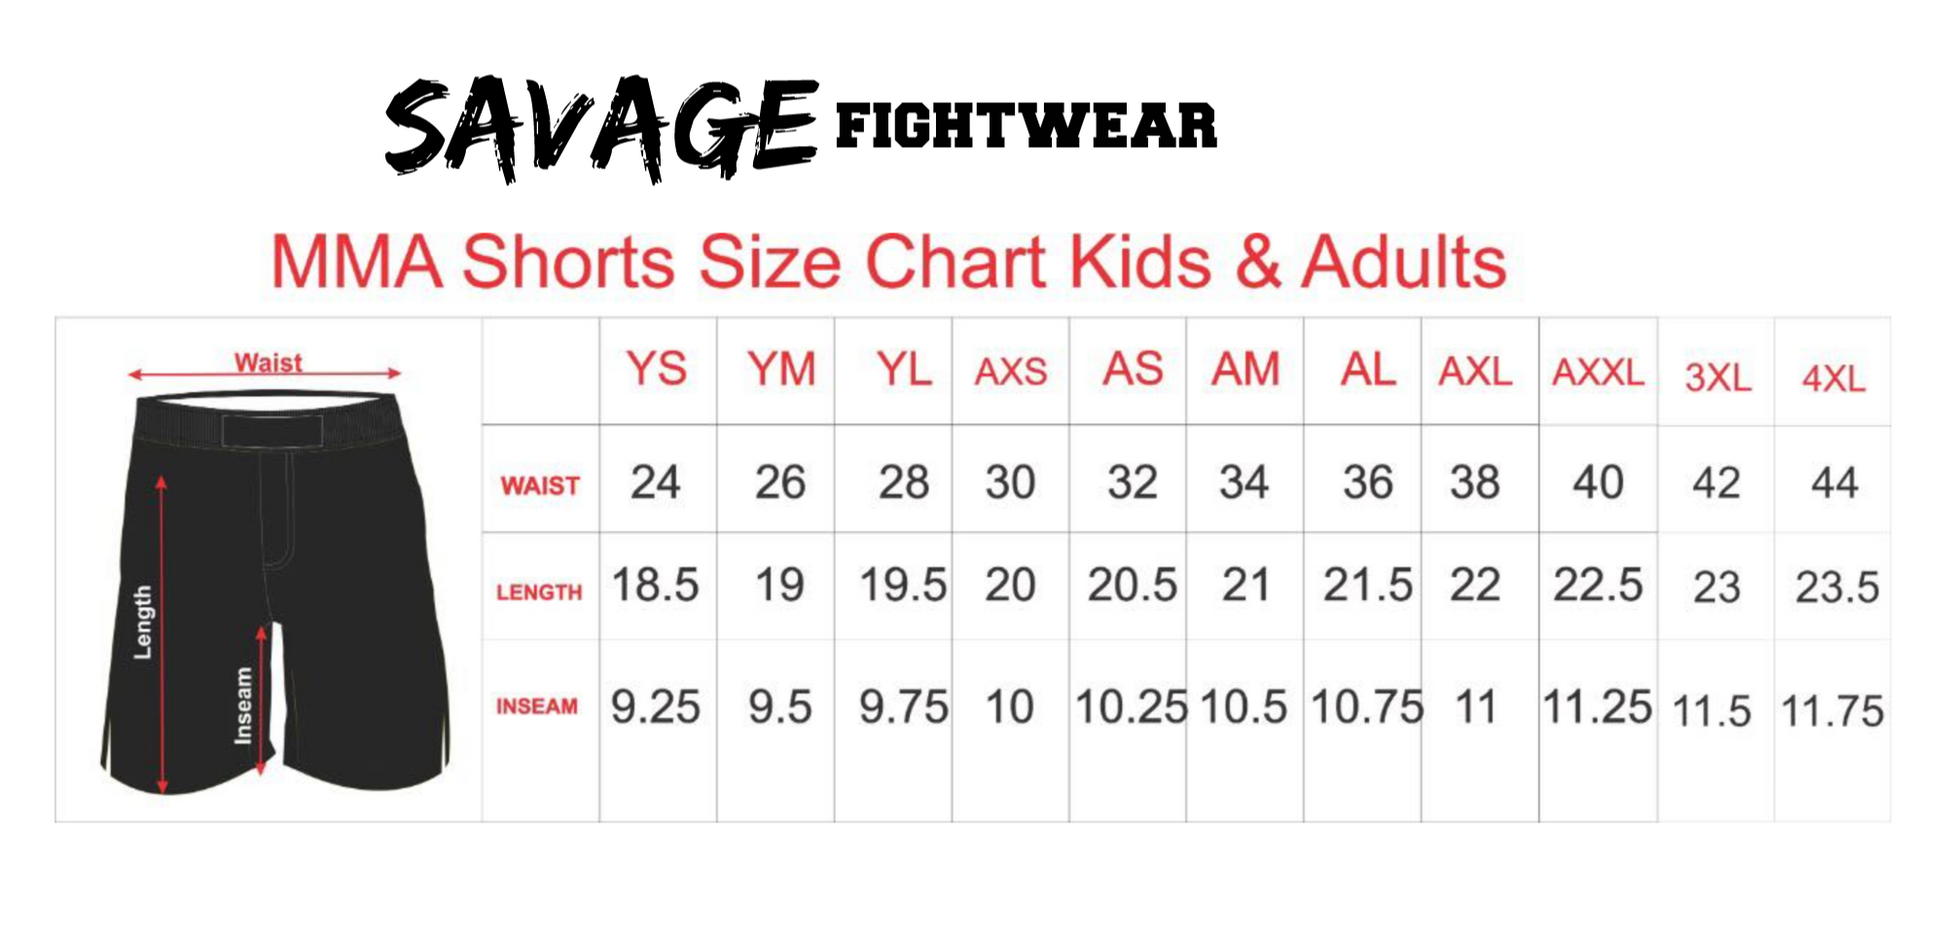 Chokes and Toe Holds Shorts Presale items Shipping To  Start December 5th Savage Fightwear